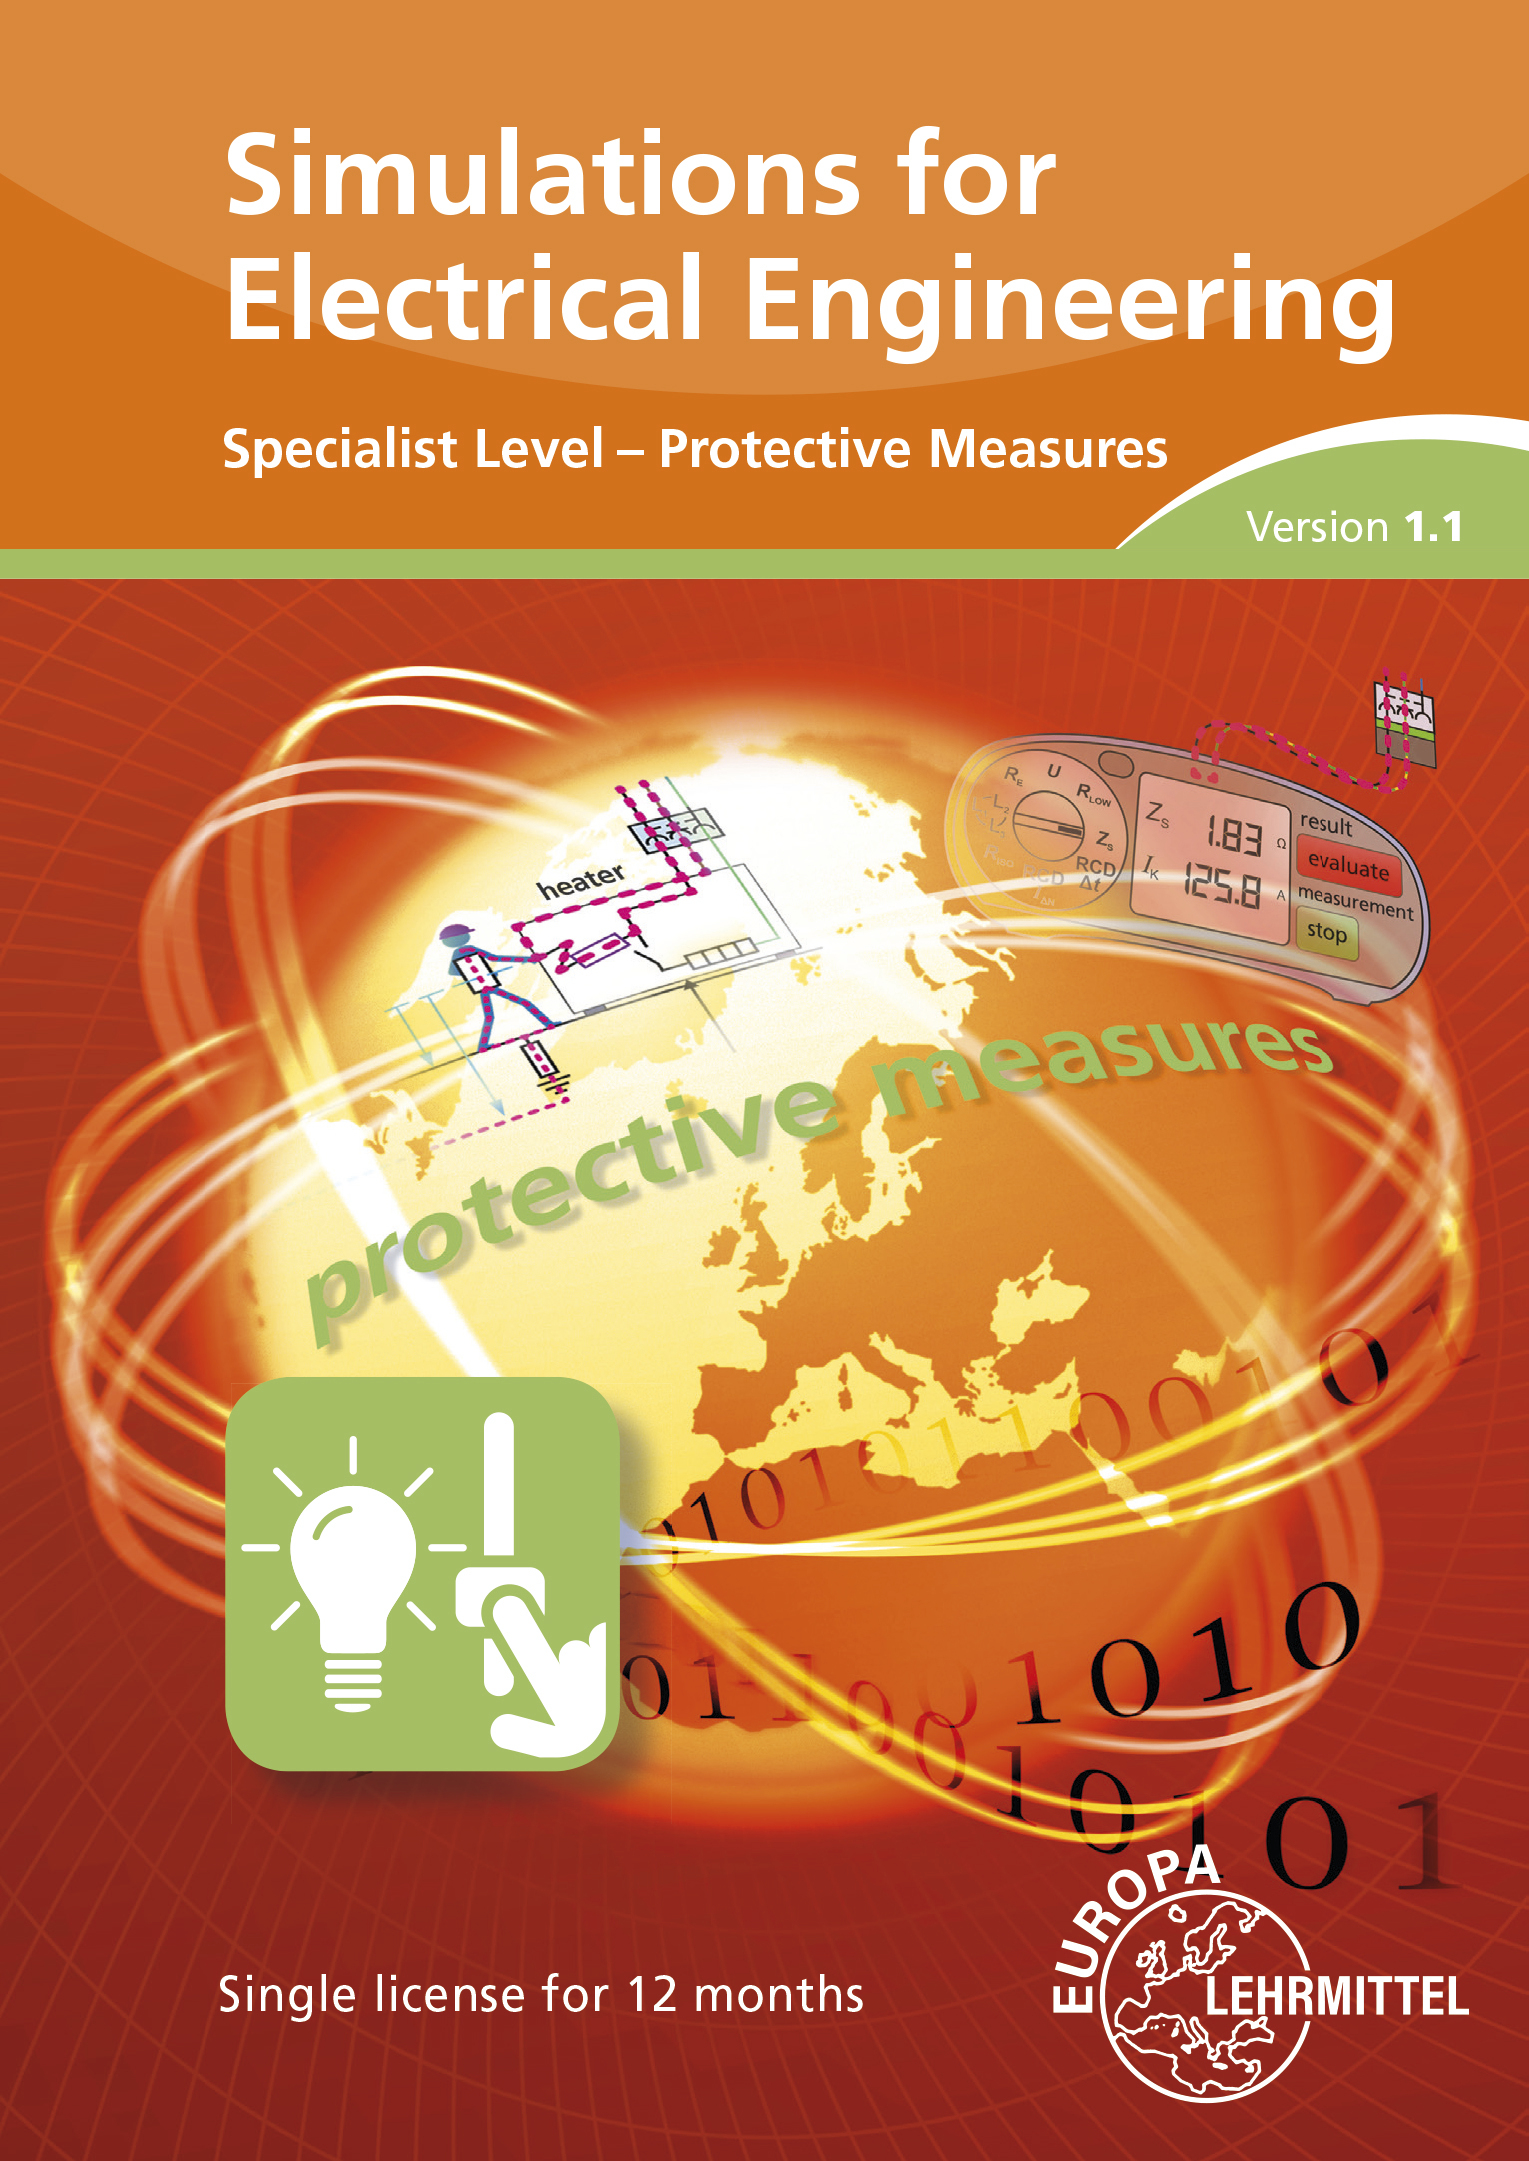 Simulations f Electrical Engineering Specialist Level 1.1 - Protective Measures